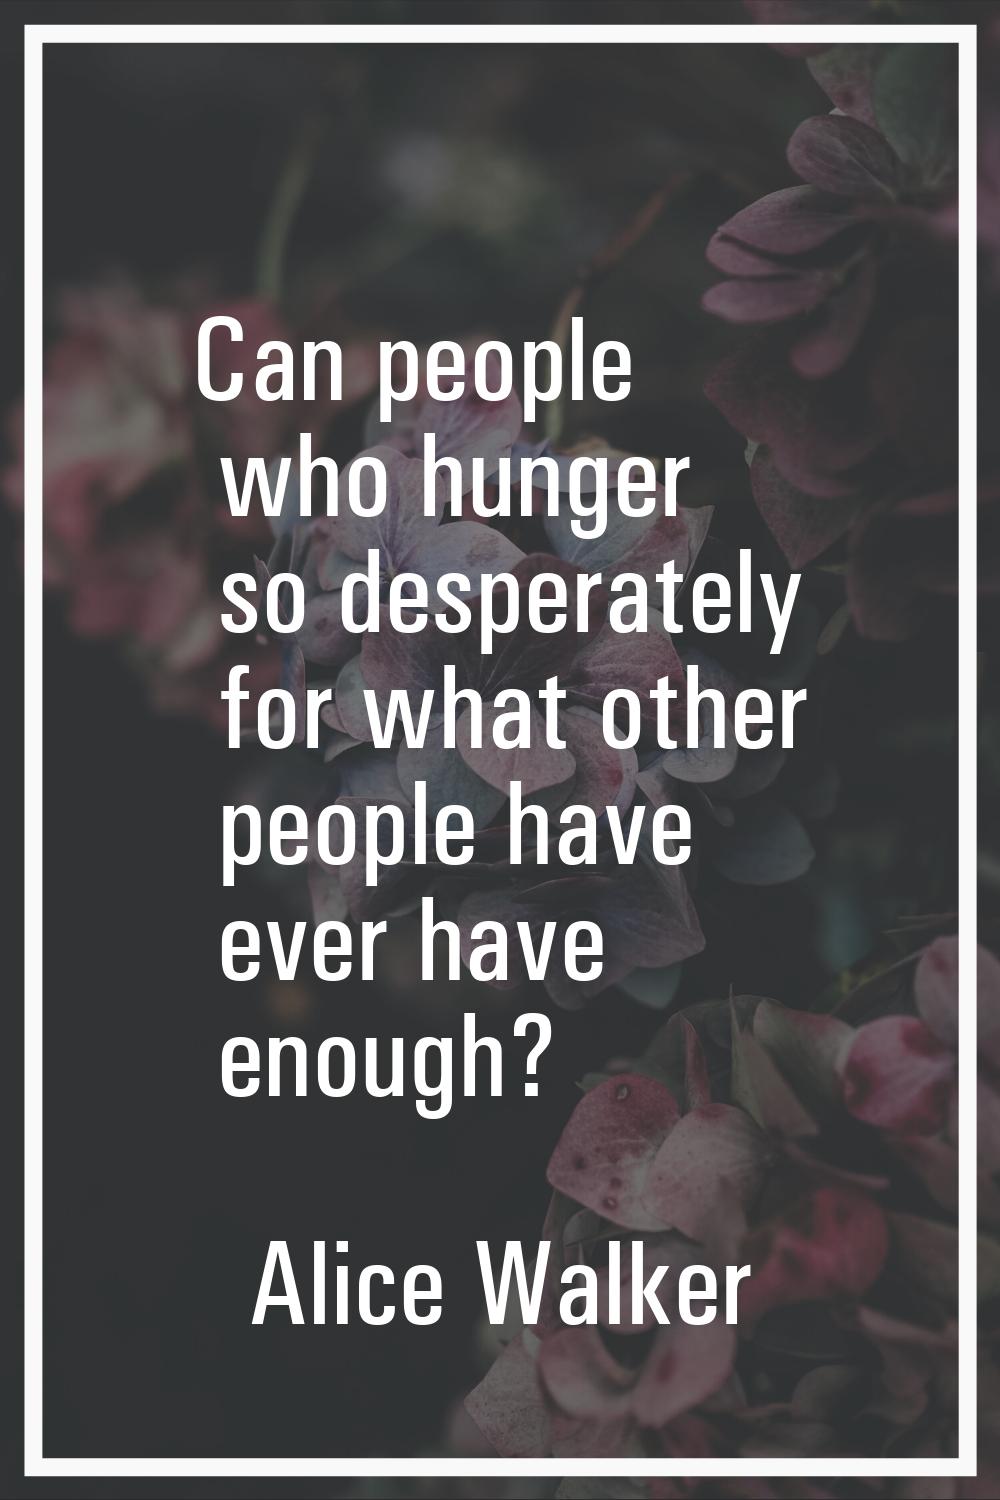 Can people who hunger so desperately for what other people have ever have enough?